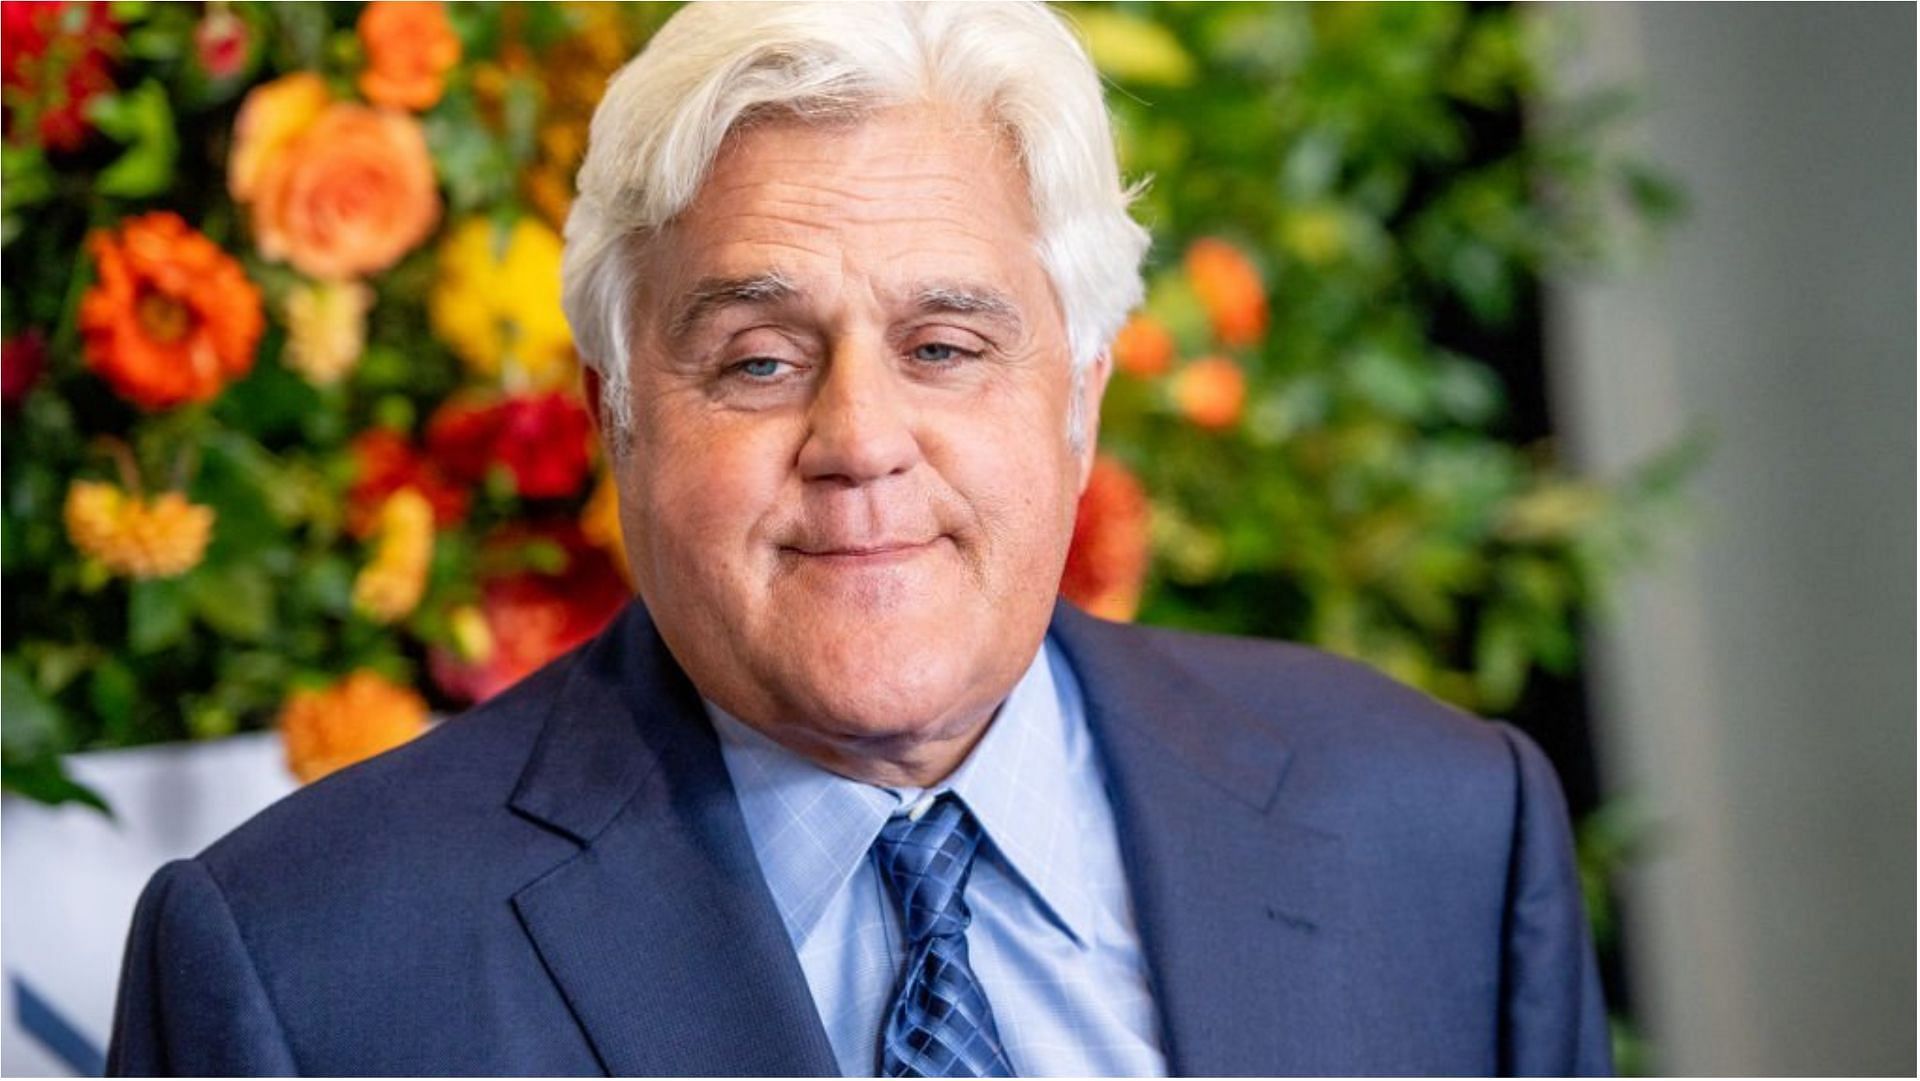 Jay Leno suffered some burn injuries at his garage in November last year (Image via Roy Rochlin/Getty Images)